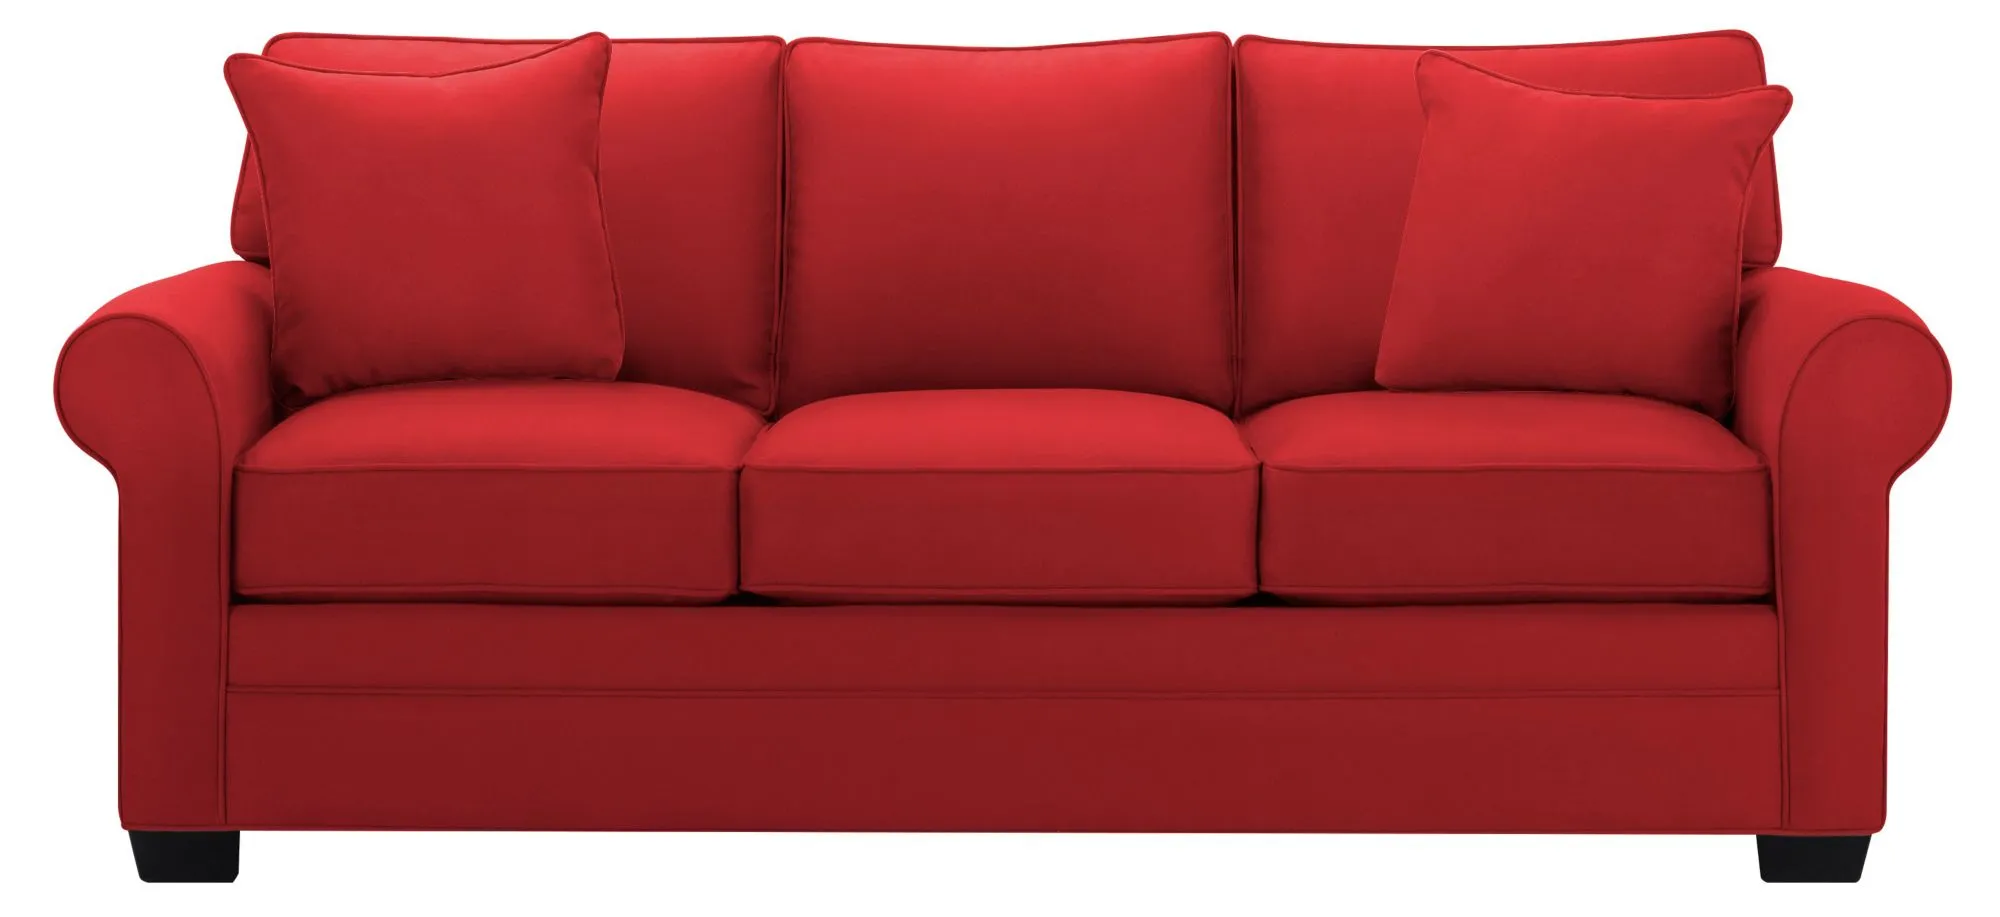 Glendora Sofa in Suede So Soft Cardinal by H.M. Richards